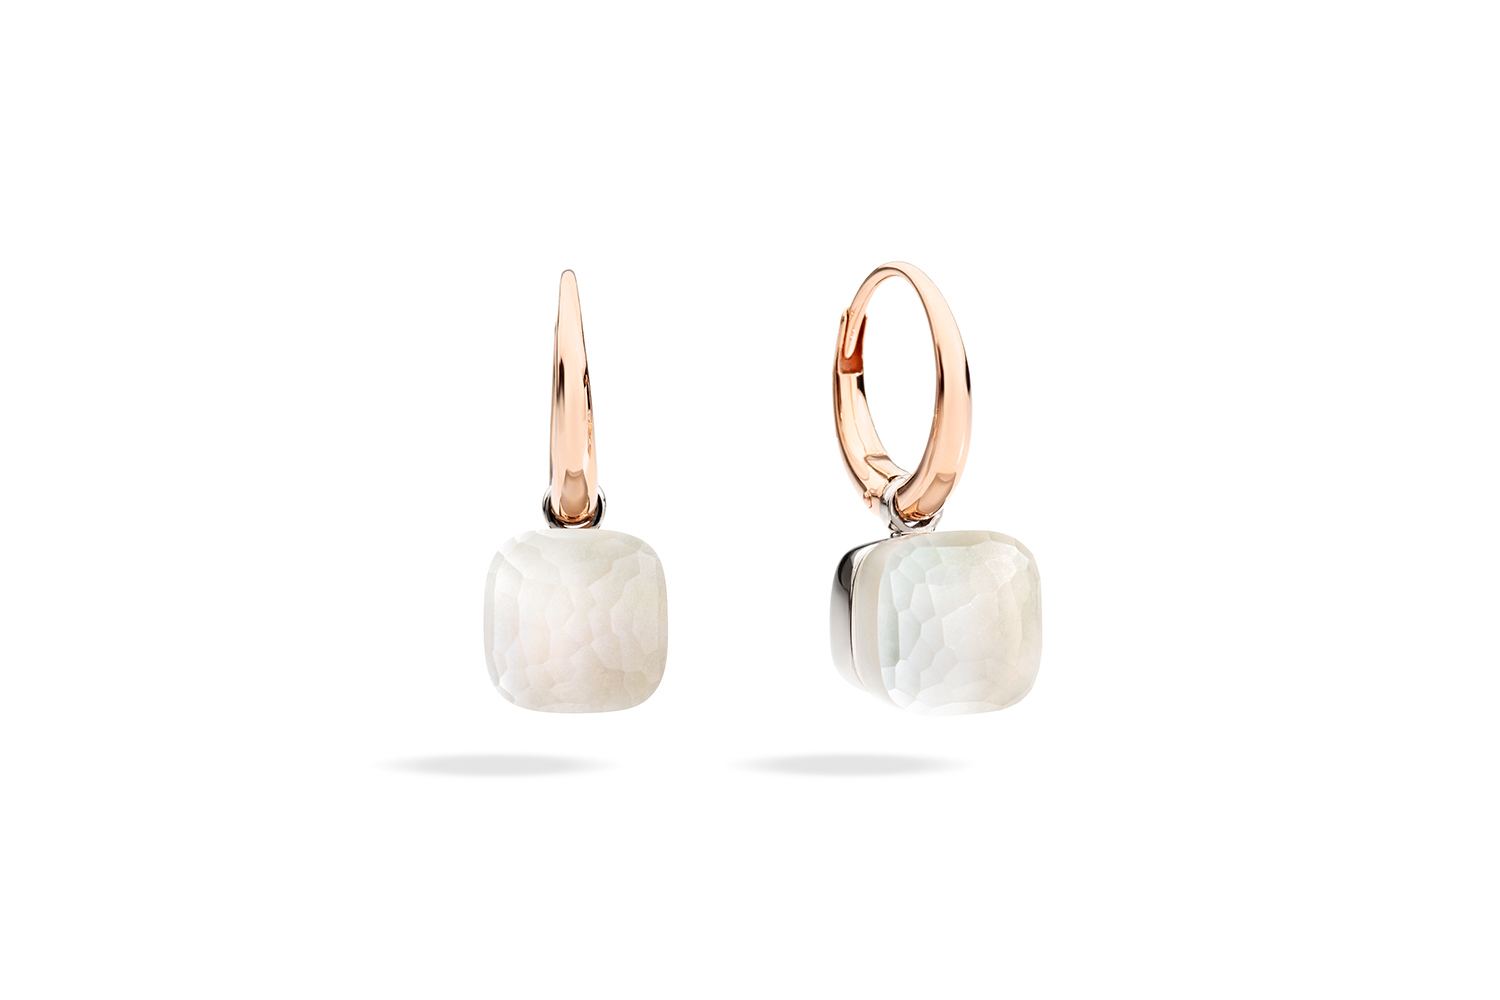 NUDO-GELE-earrings-in-rose-gold-with-white-topaz-mother-of-pearl-by-Pomellato